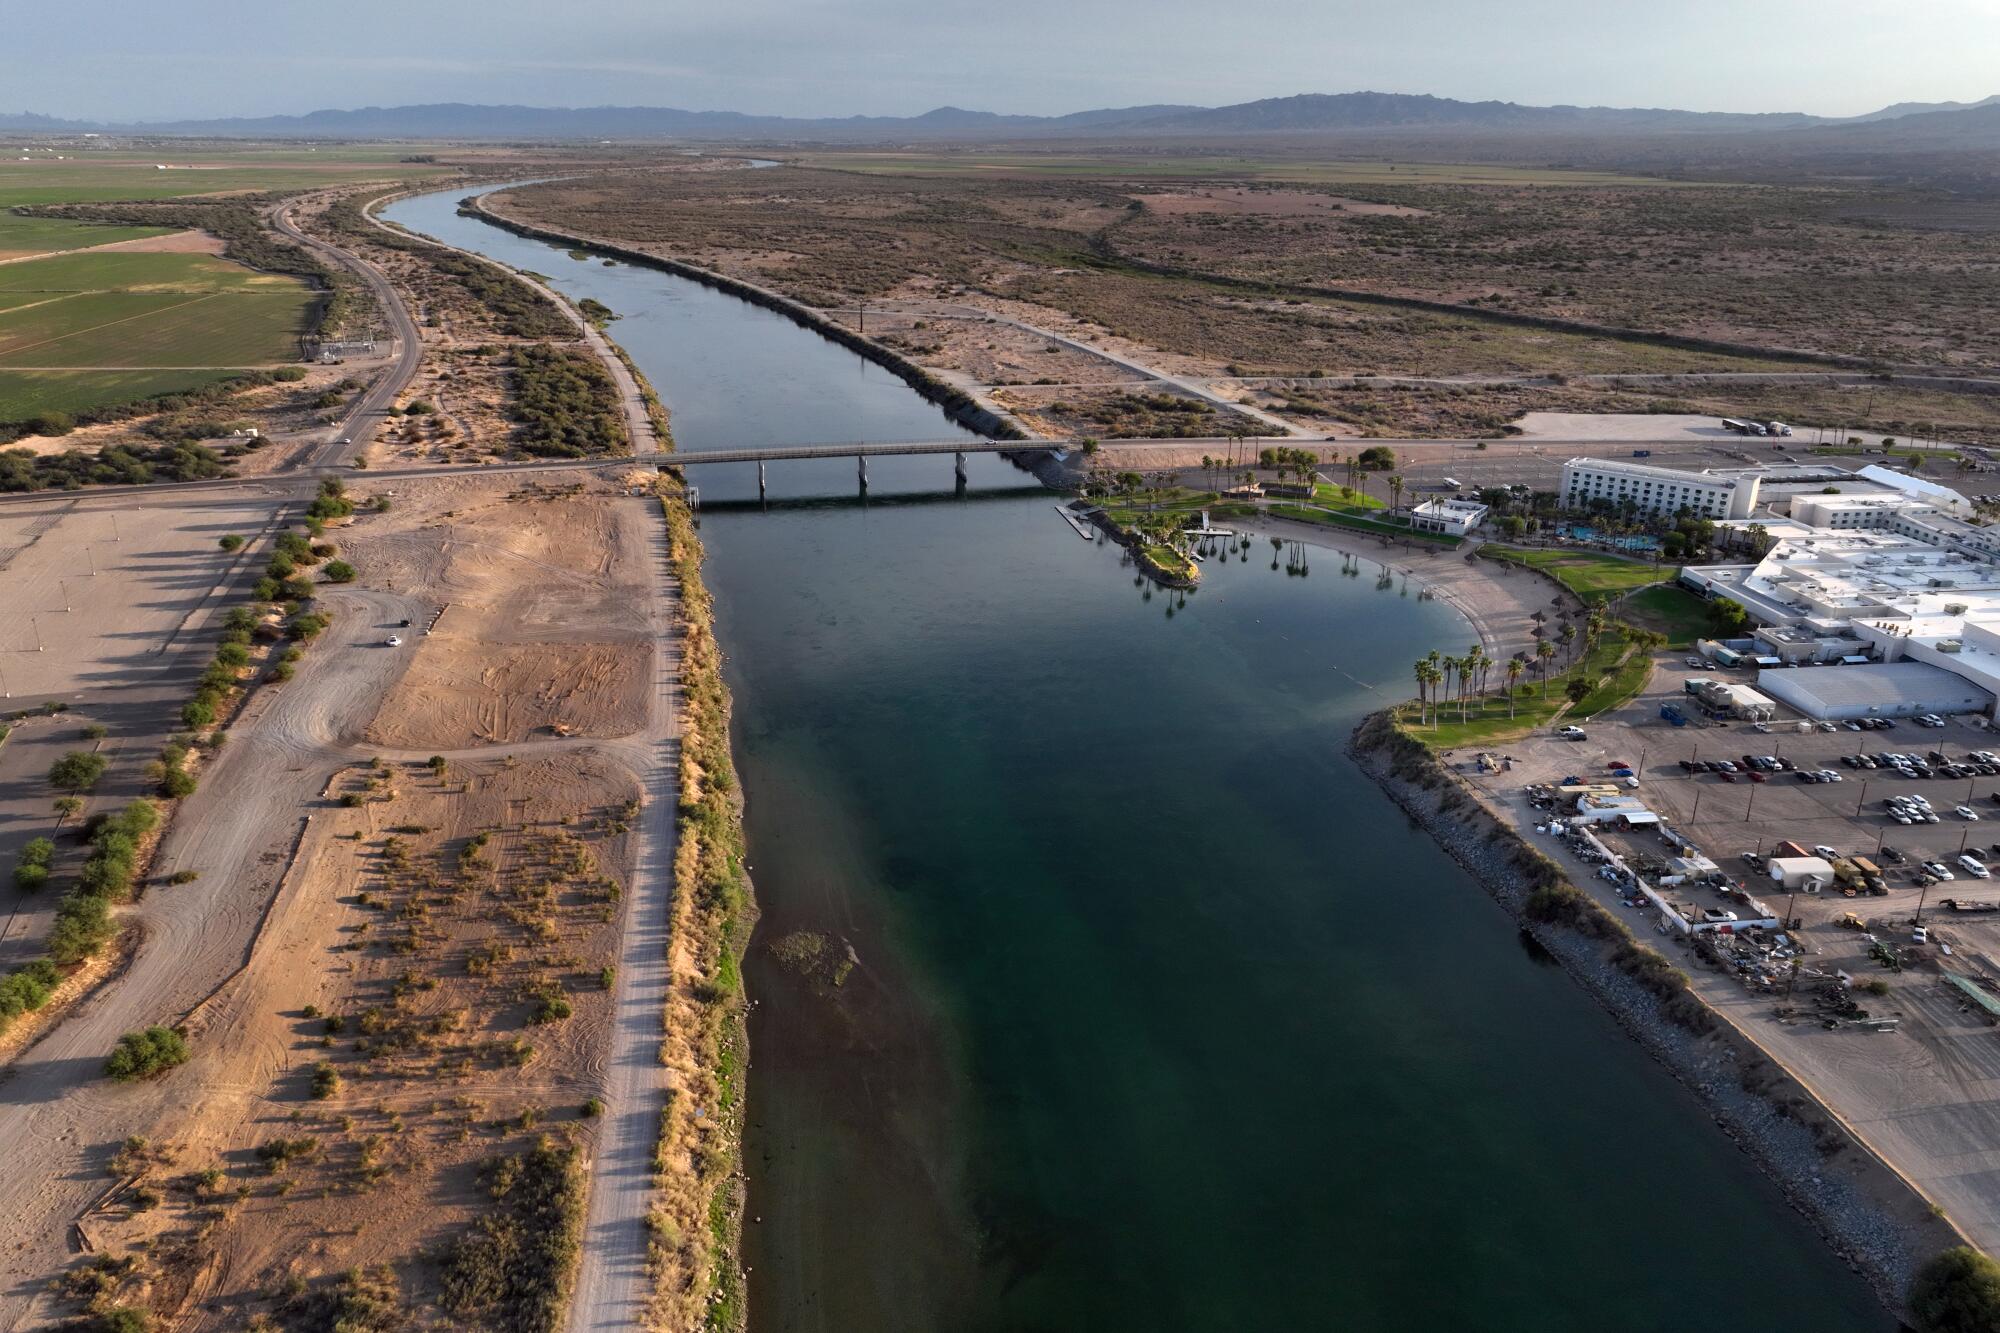 The Colorado River runs through the Fort Mojave Indian Reservation.